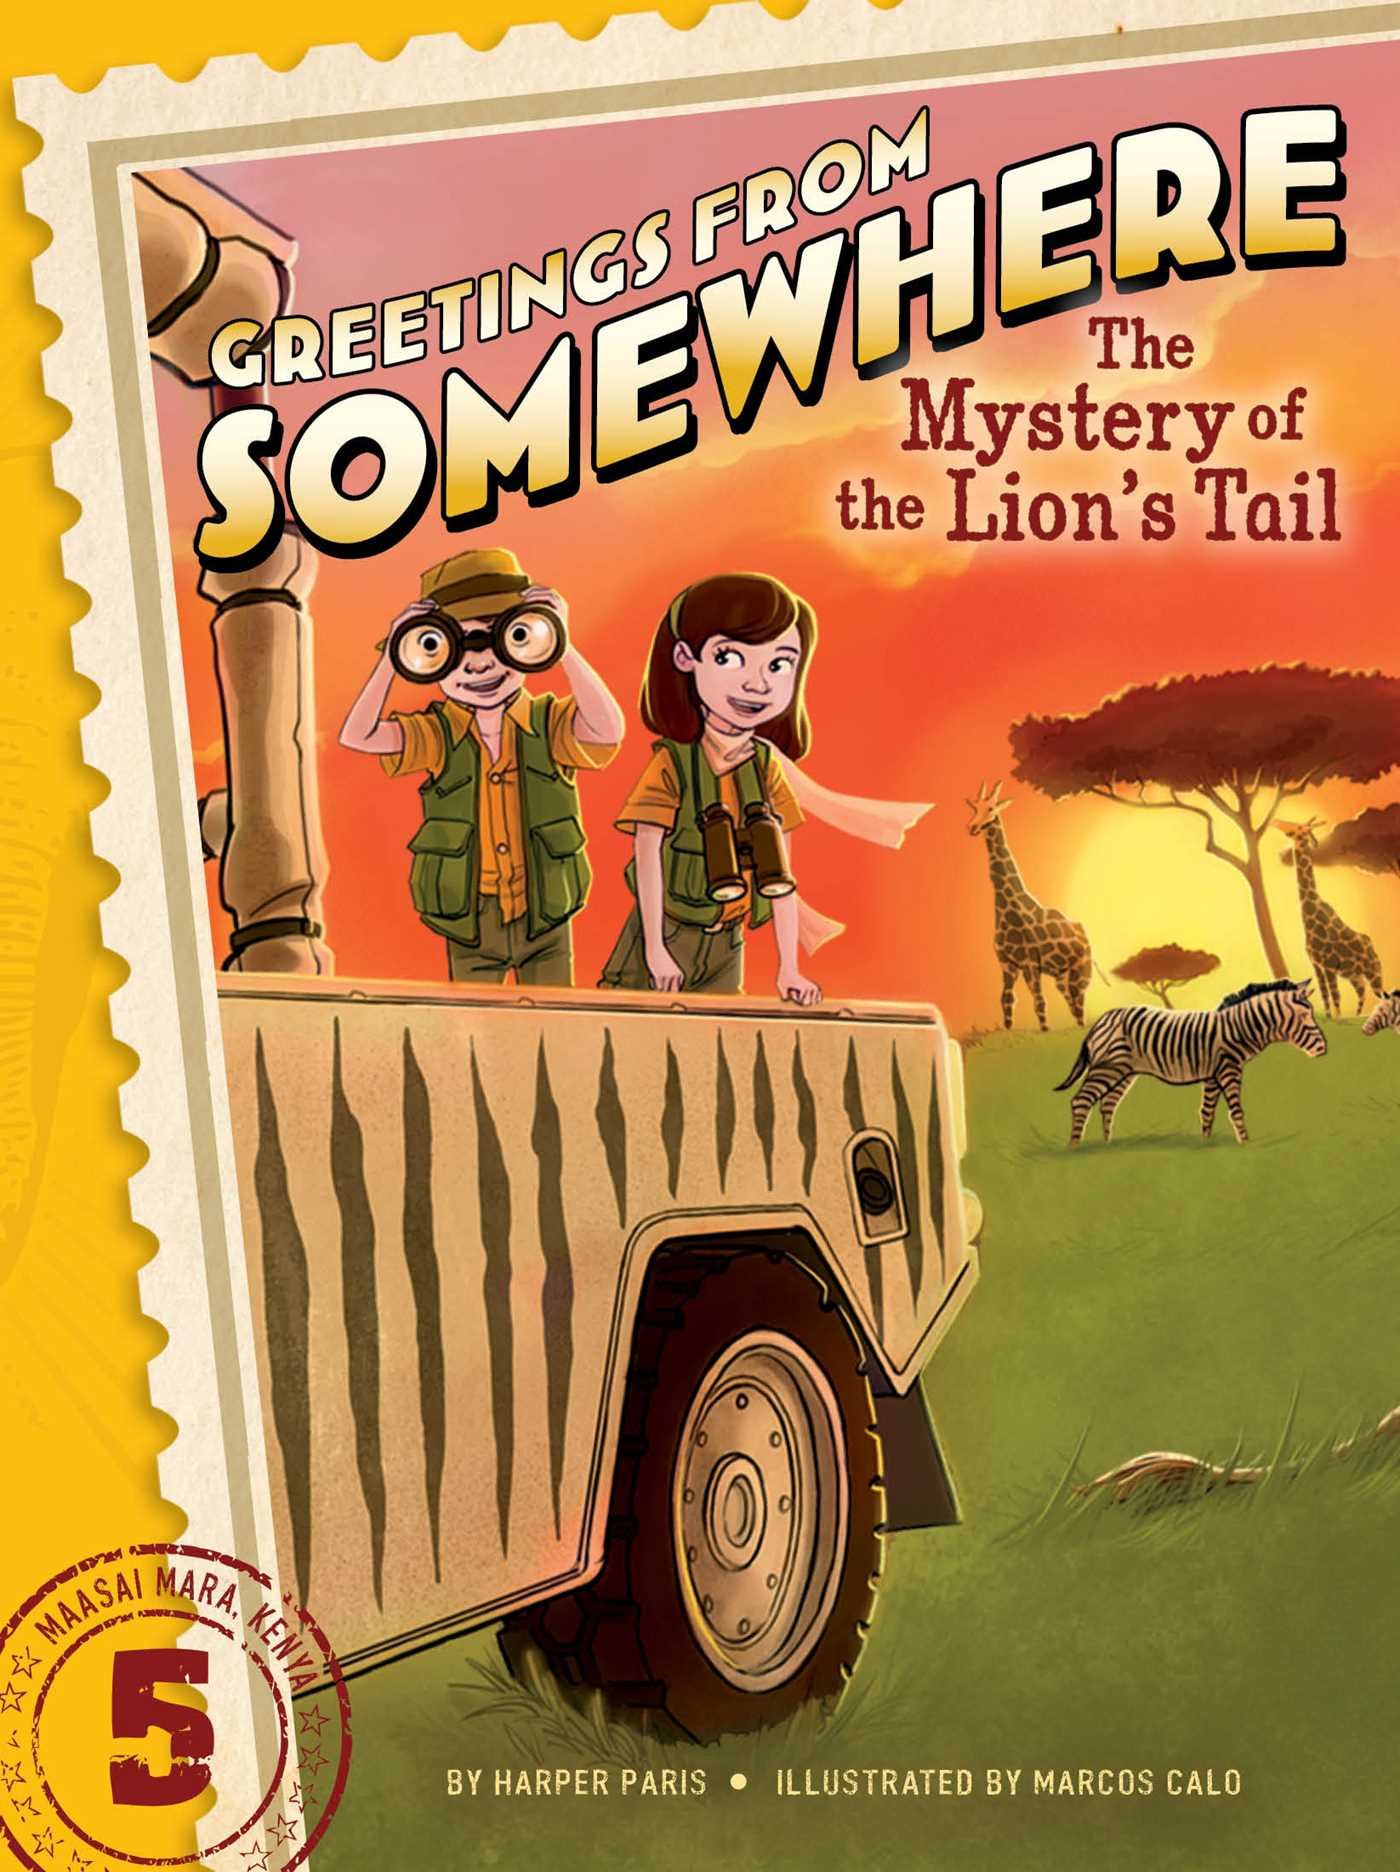 Image for "The Mystery of the Lion's Tail"